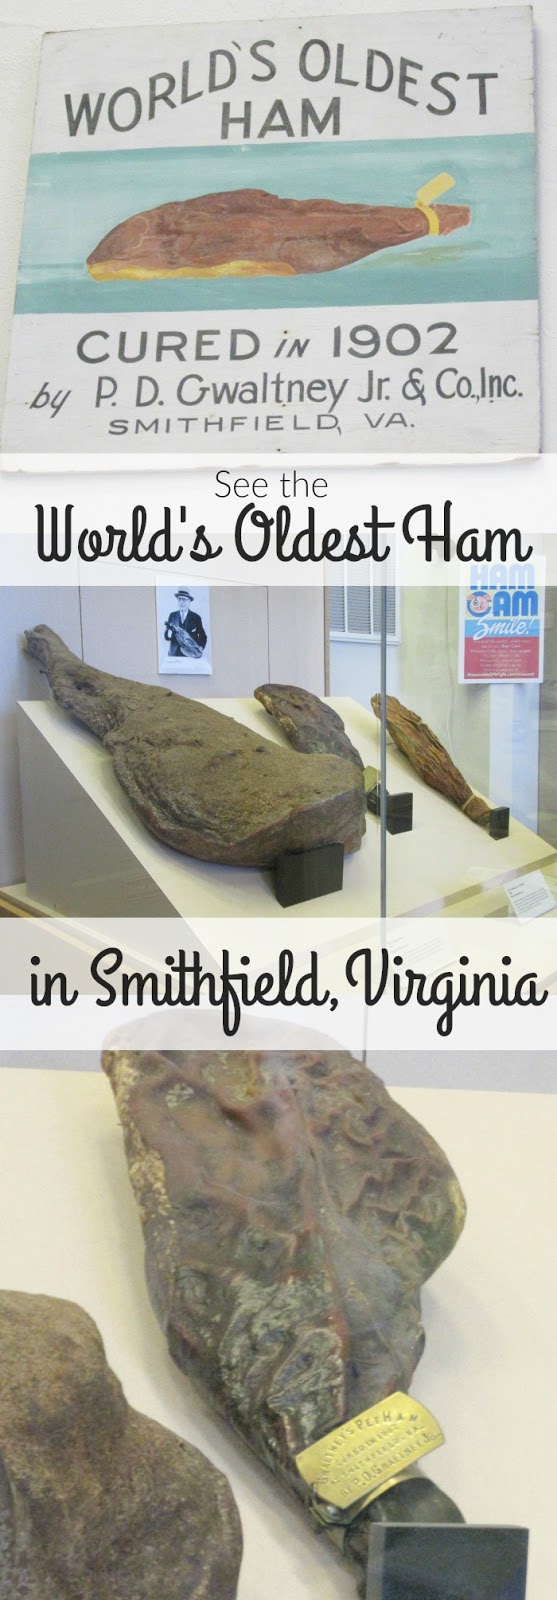 See the World's Oldest Ham at the Isle of Wight County Museum in Smithfield, Virginia